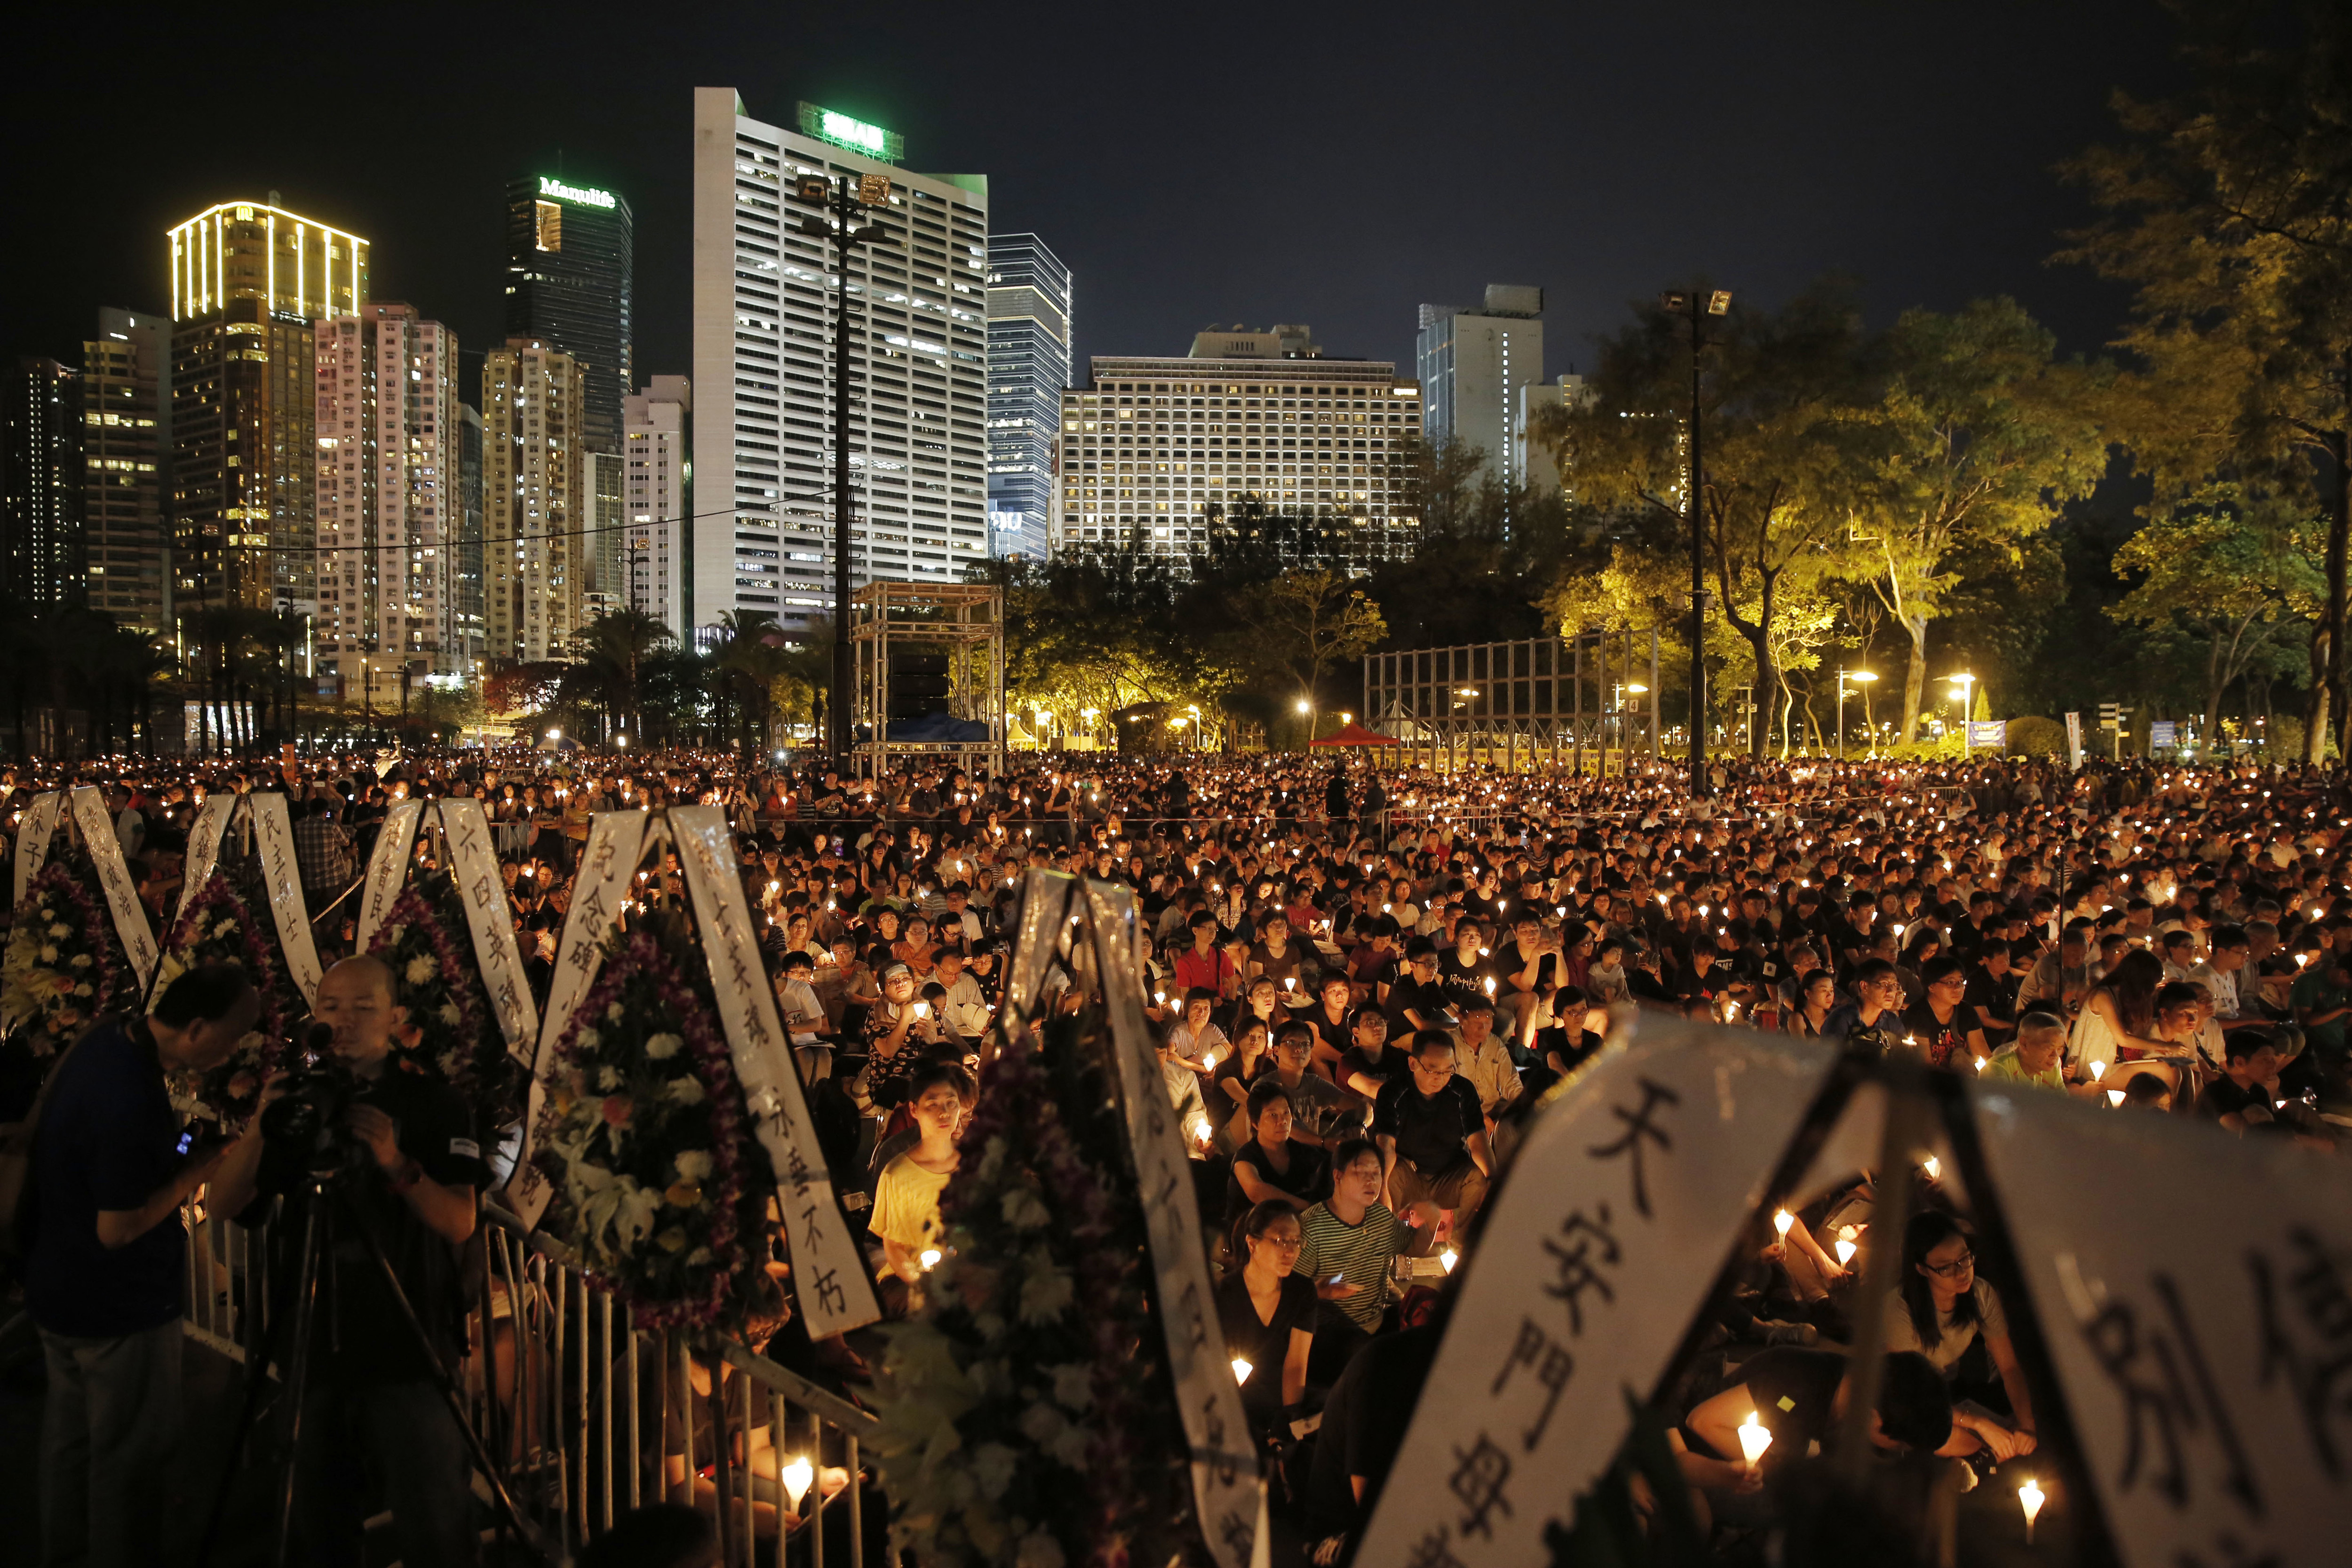 Tens of thousands of people attend a candlelight vigil at Victoria 